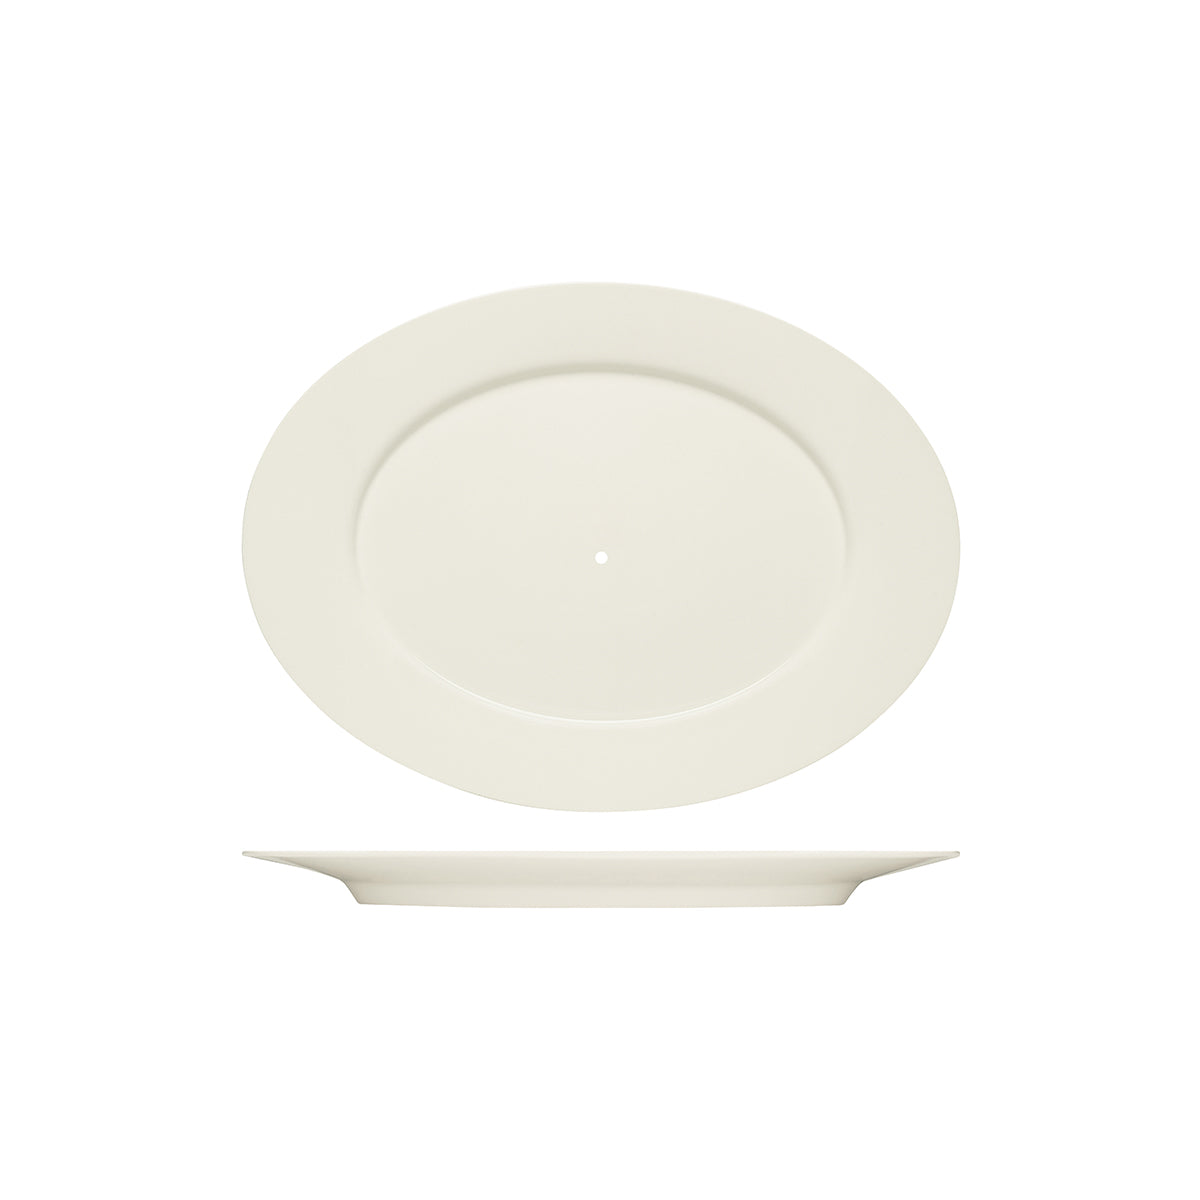 BHS6697204 Bauscher Bauscher Purity Oval Platter with Wide Rim 330x240mm To Suit Serving Stand Tomkin Australia Hospitality Supplies